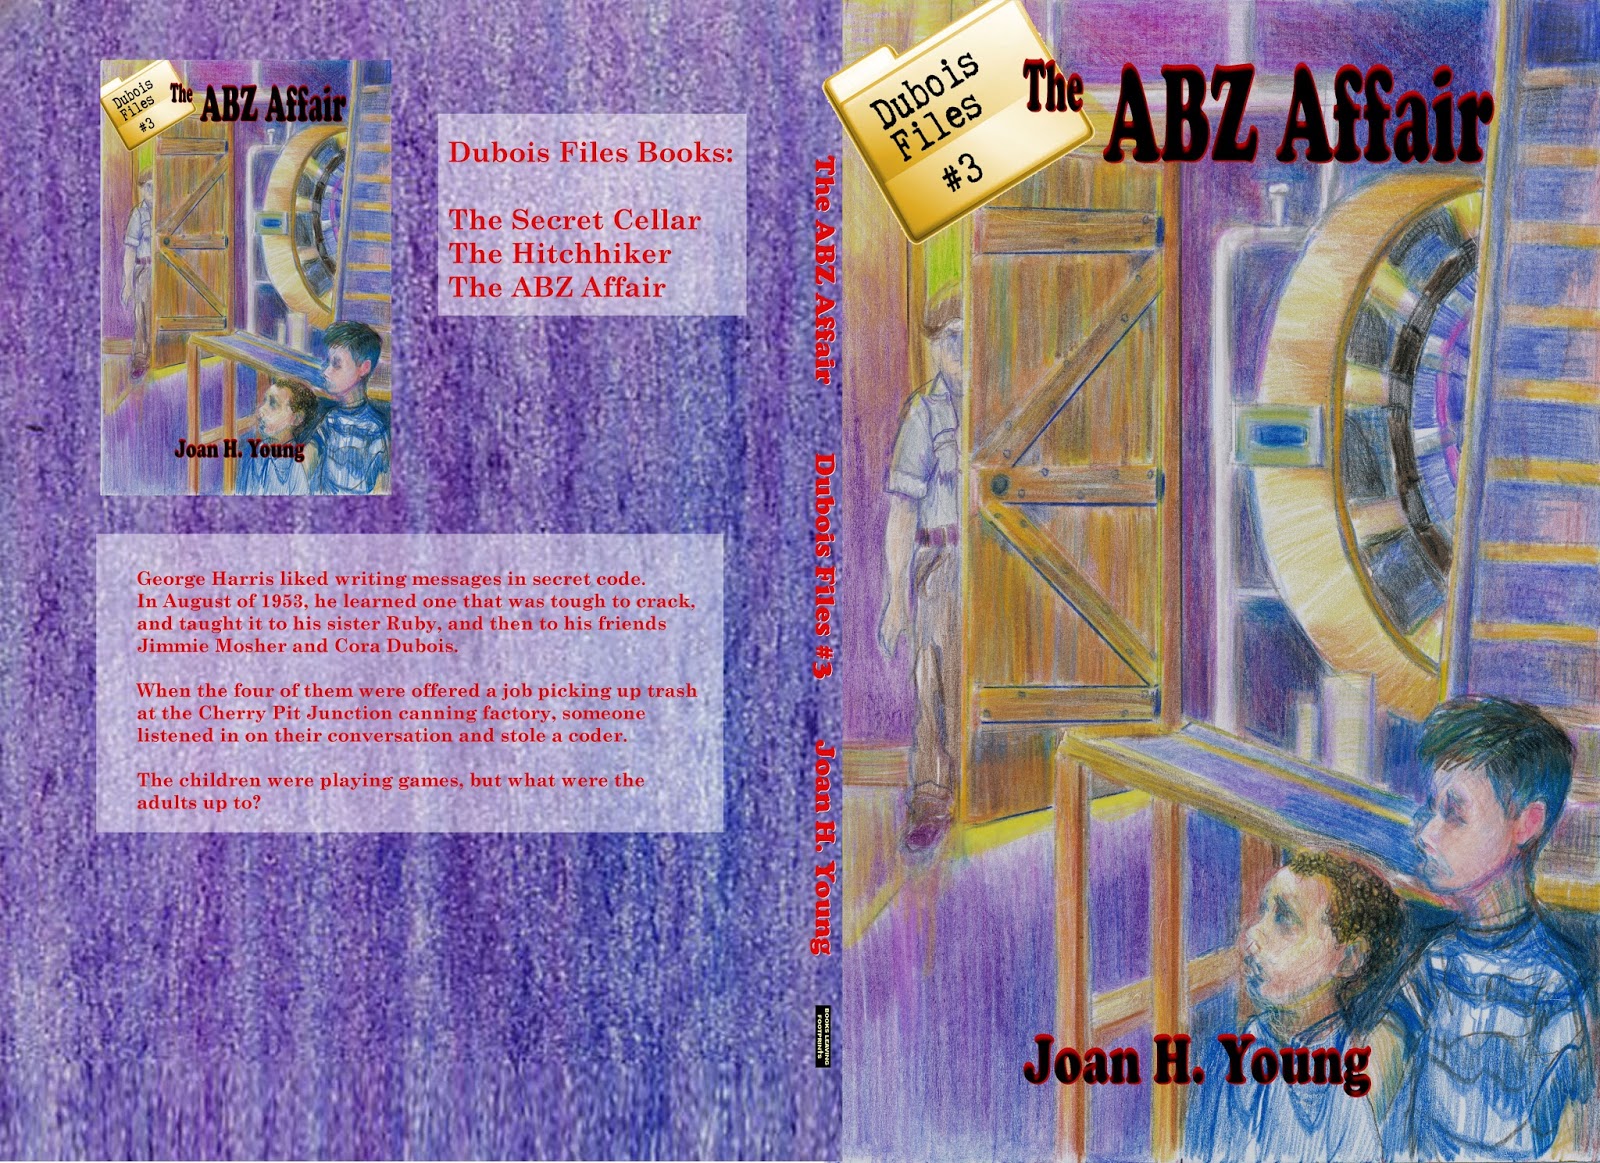 full cover for print edition of The ABZ Affair